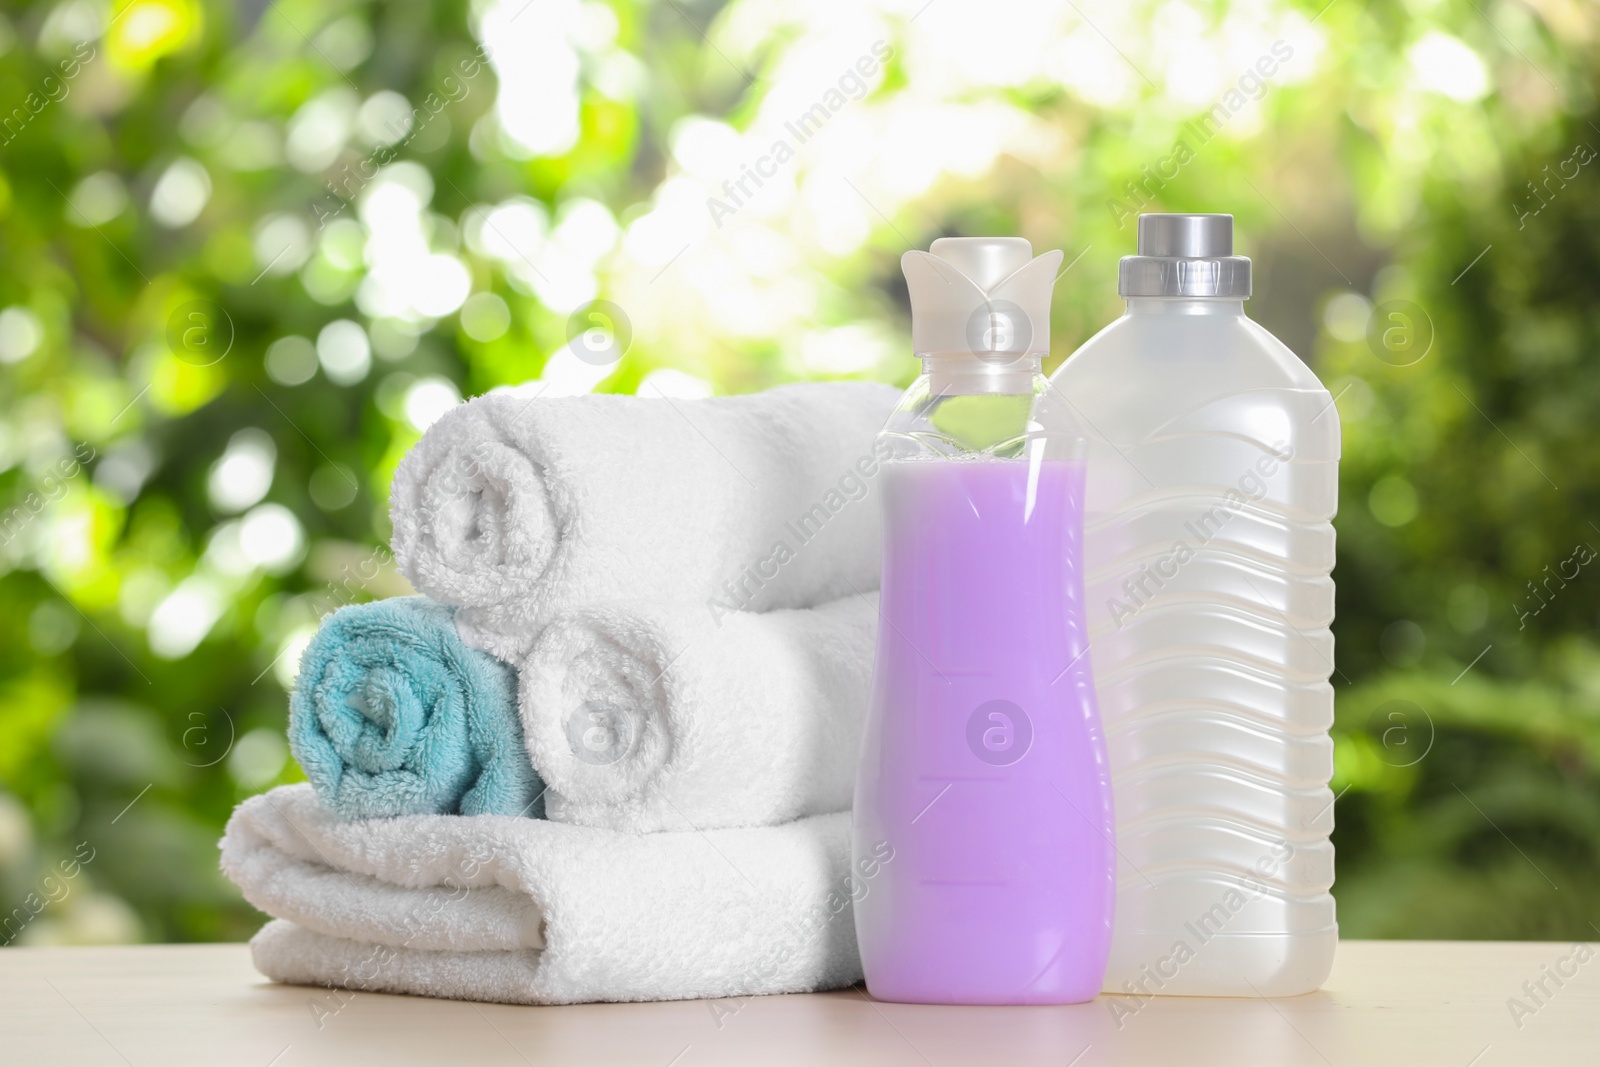 Photo of Soft bath towels and laundry detergents on table against blurred background